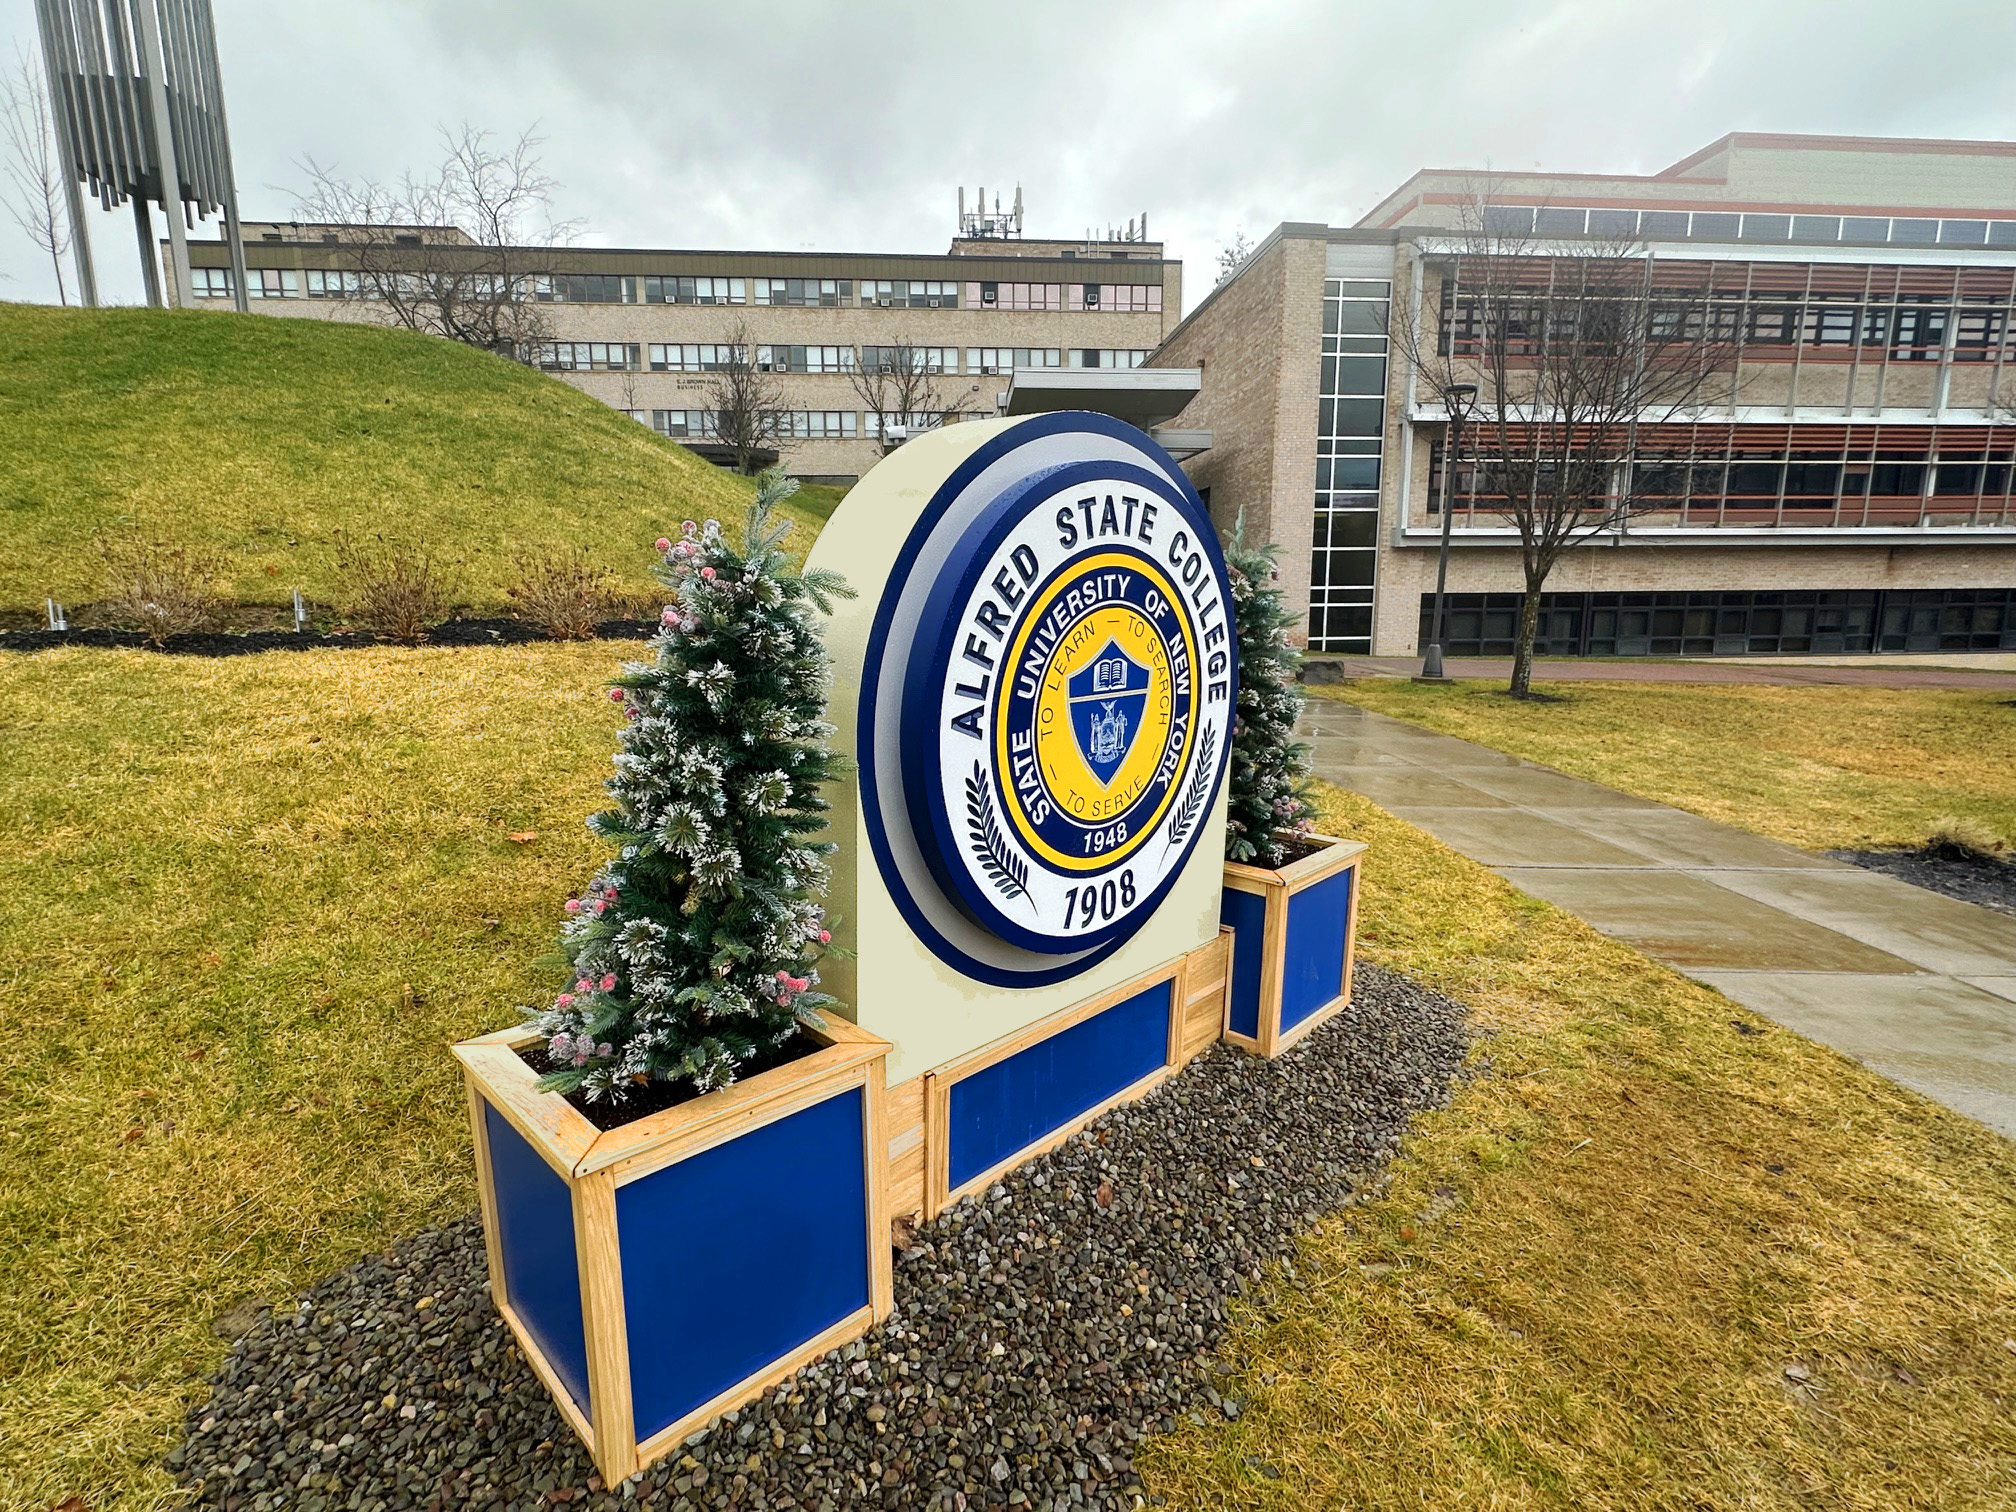 Holiday decorations are throughout the village and all around the Alfred State campus.